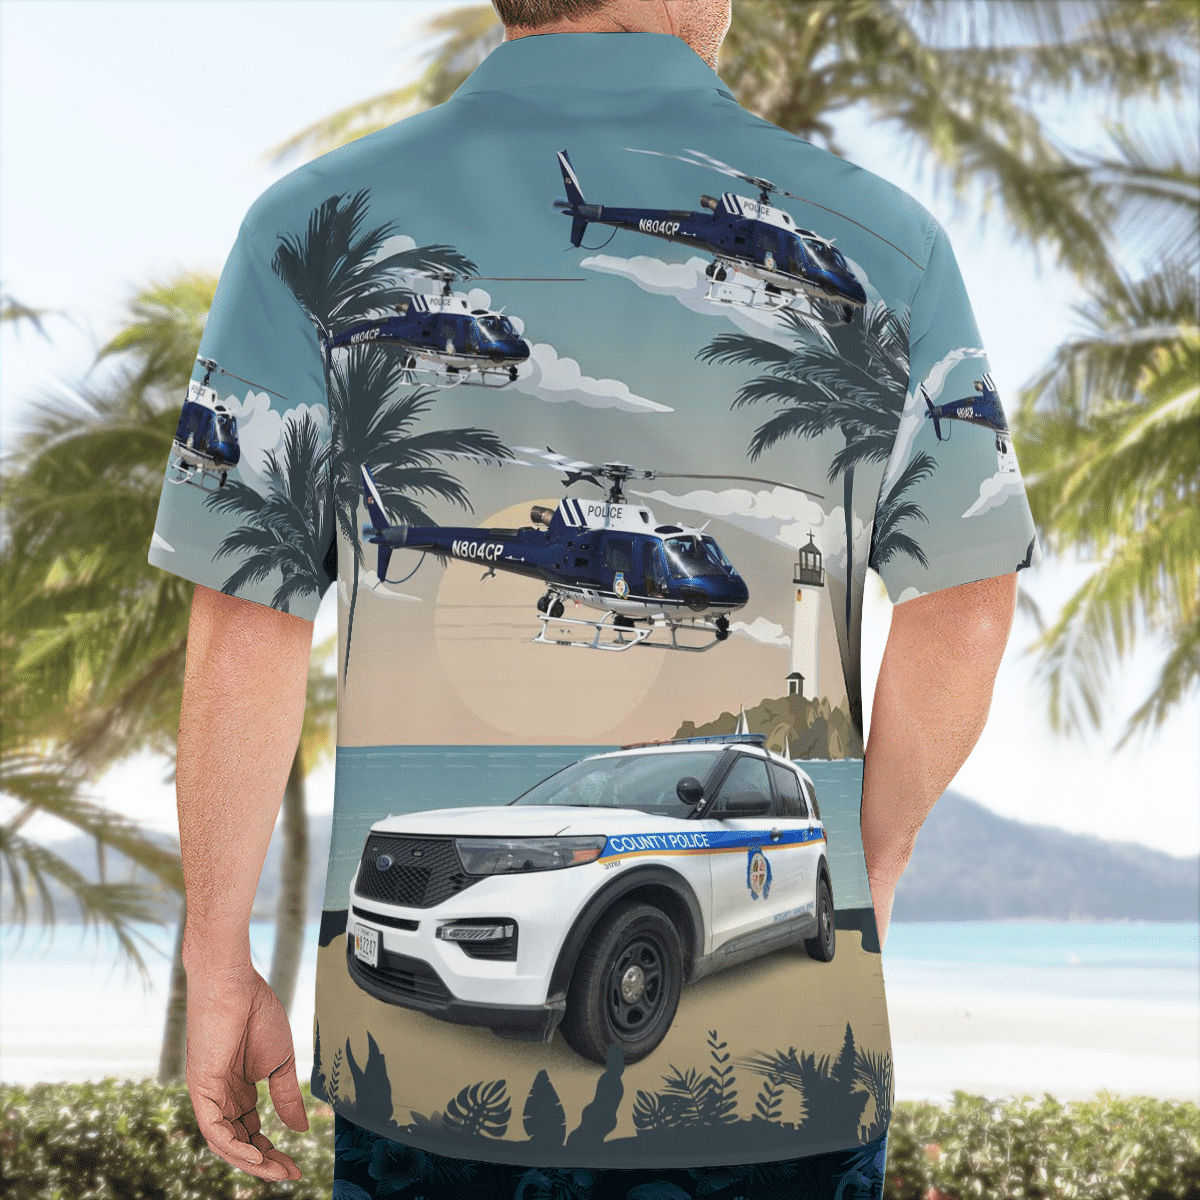 BEST Baltimore County Police Baltimore County Maryland 2020 Ford Explorer And Eurocopter AS-350B-3 Ecureuil Hawaii Shirt2